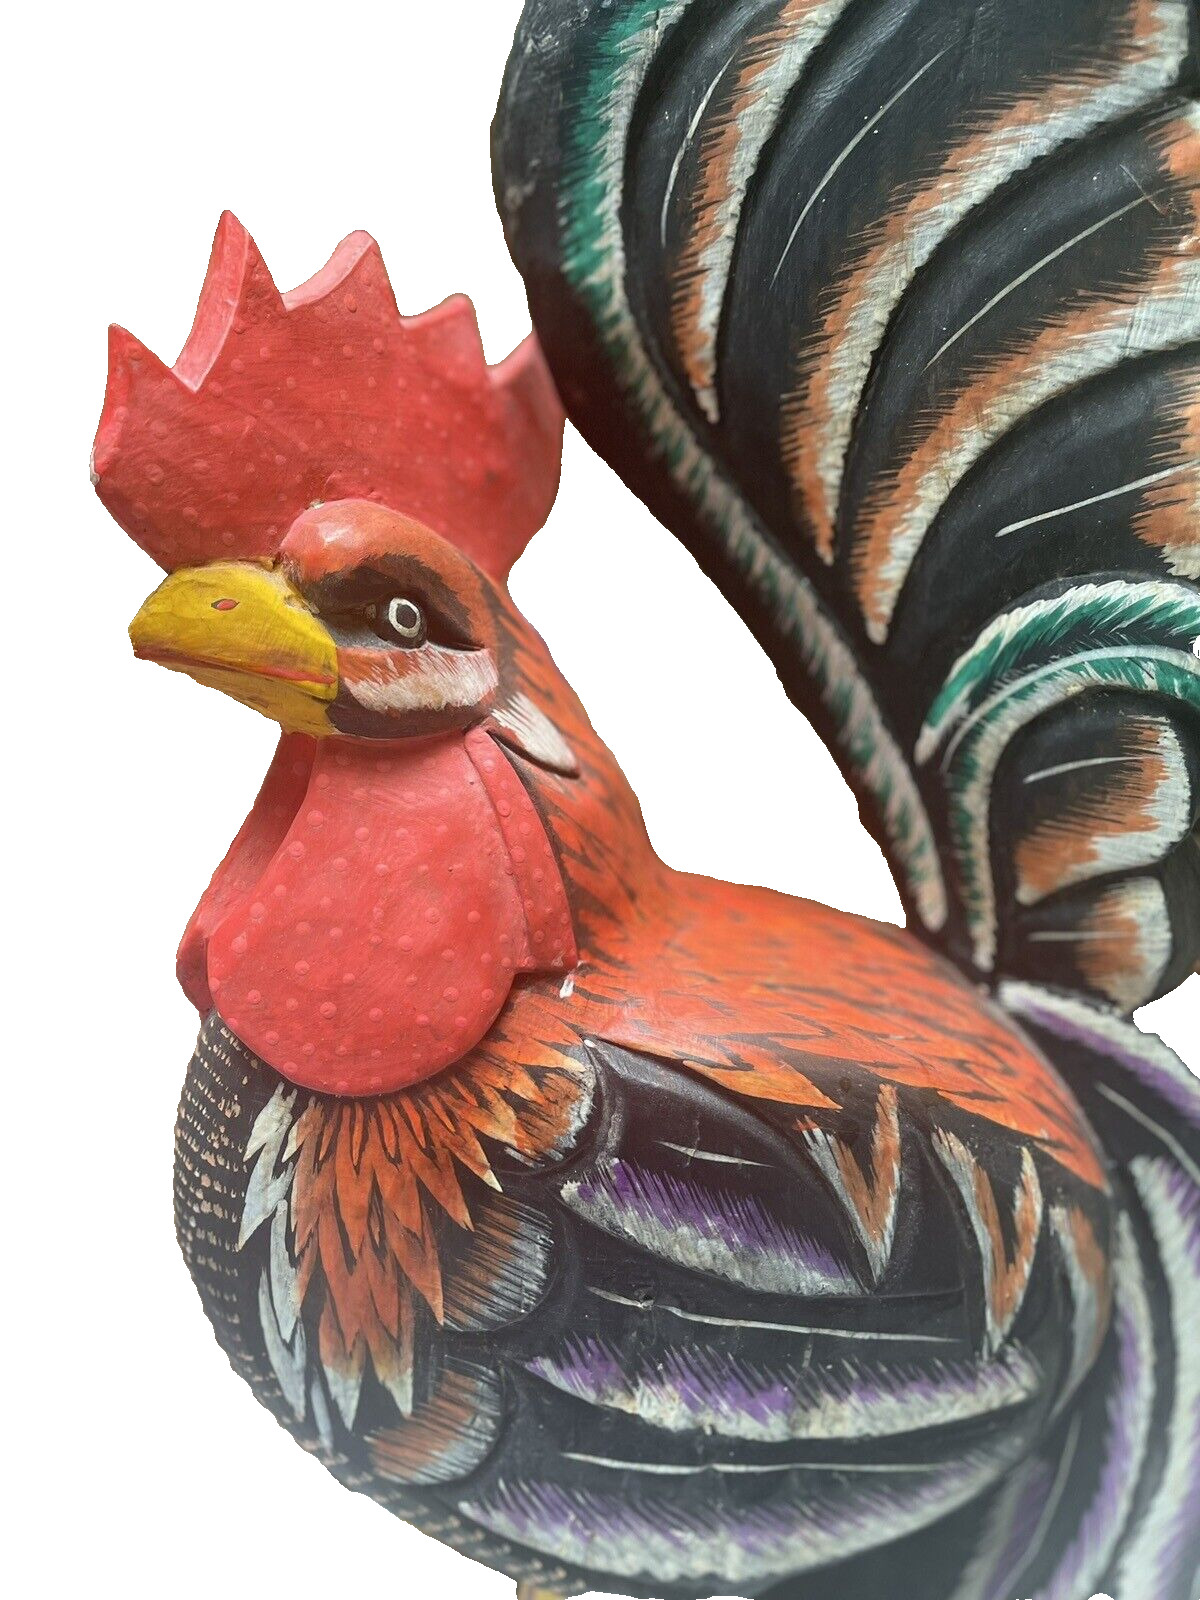 Hand Carved Hand Painted Decorative Wooded Rooster Sculpture Figure Large 24-in